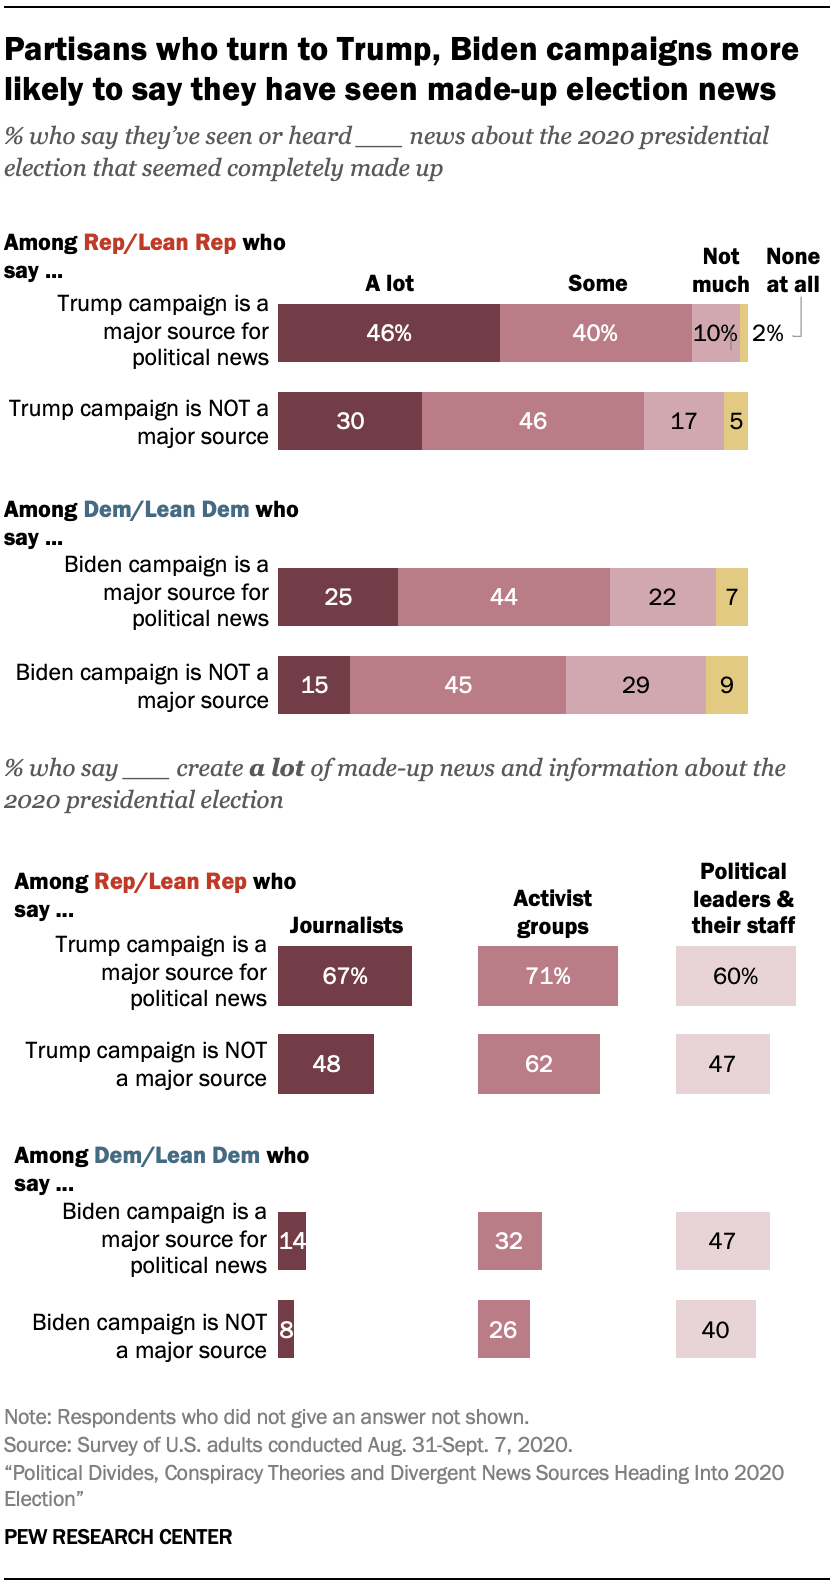 Partisans who turn to Trump, Biden campaigns more likely to say they have seen made-up election news